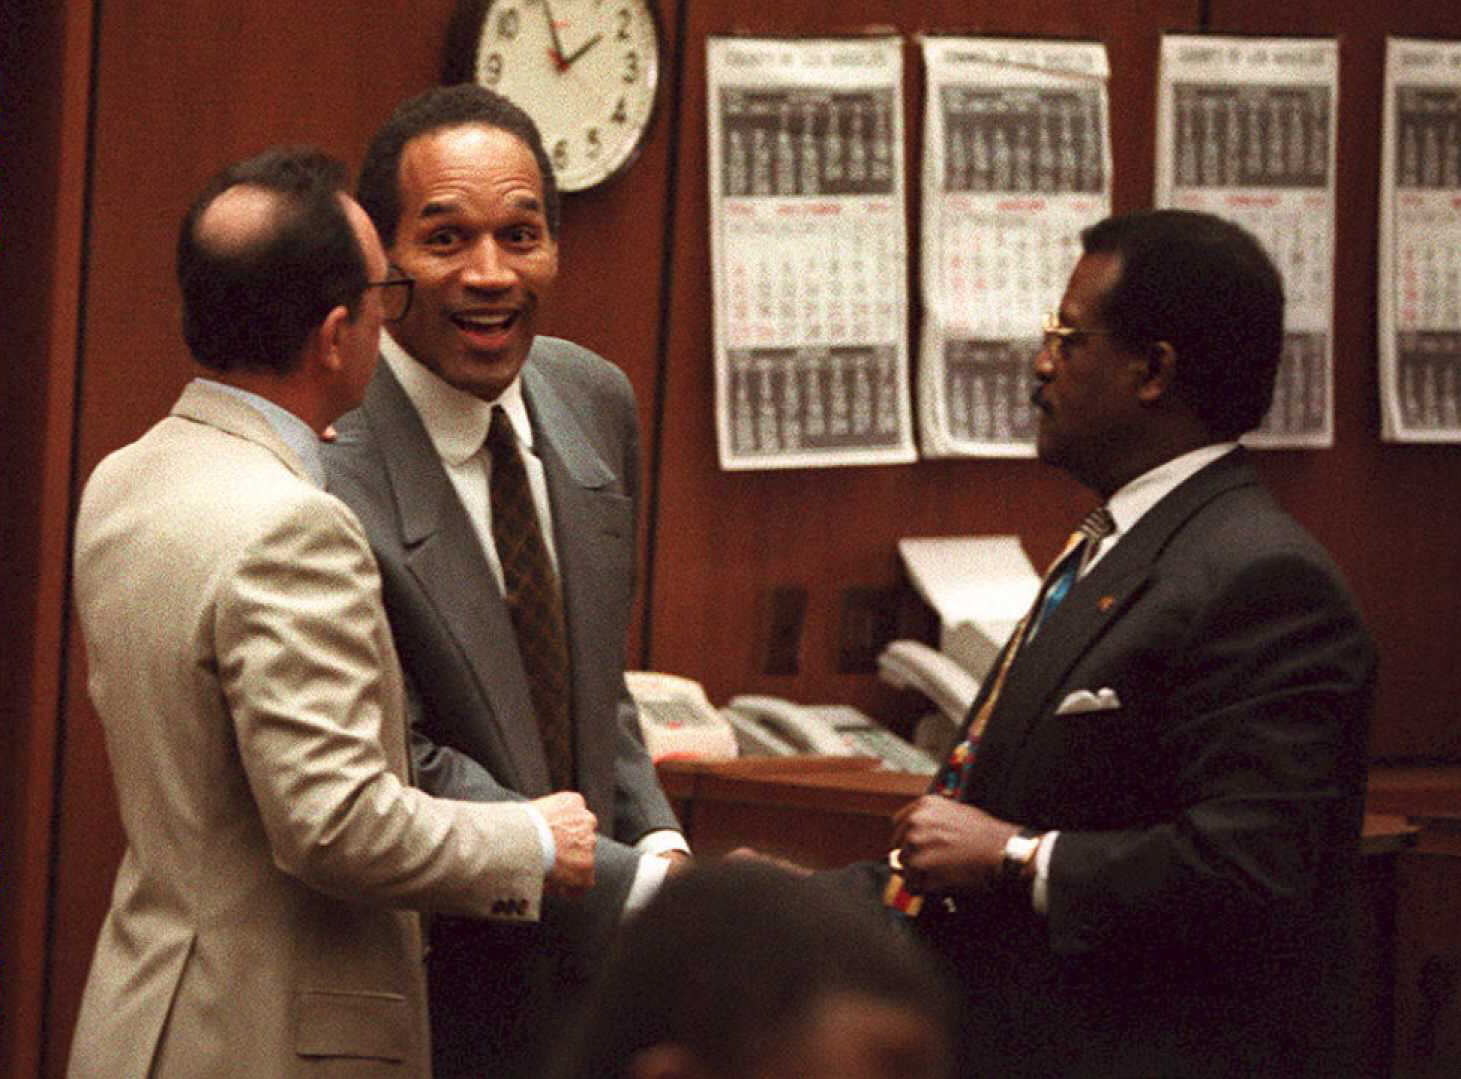 O.J. Simpson laughs with Robert Shapiro and Johnnie Cochran